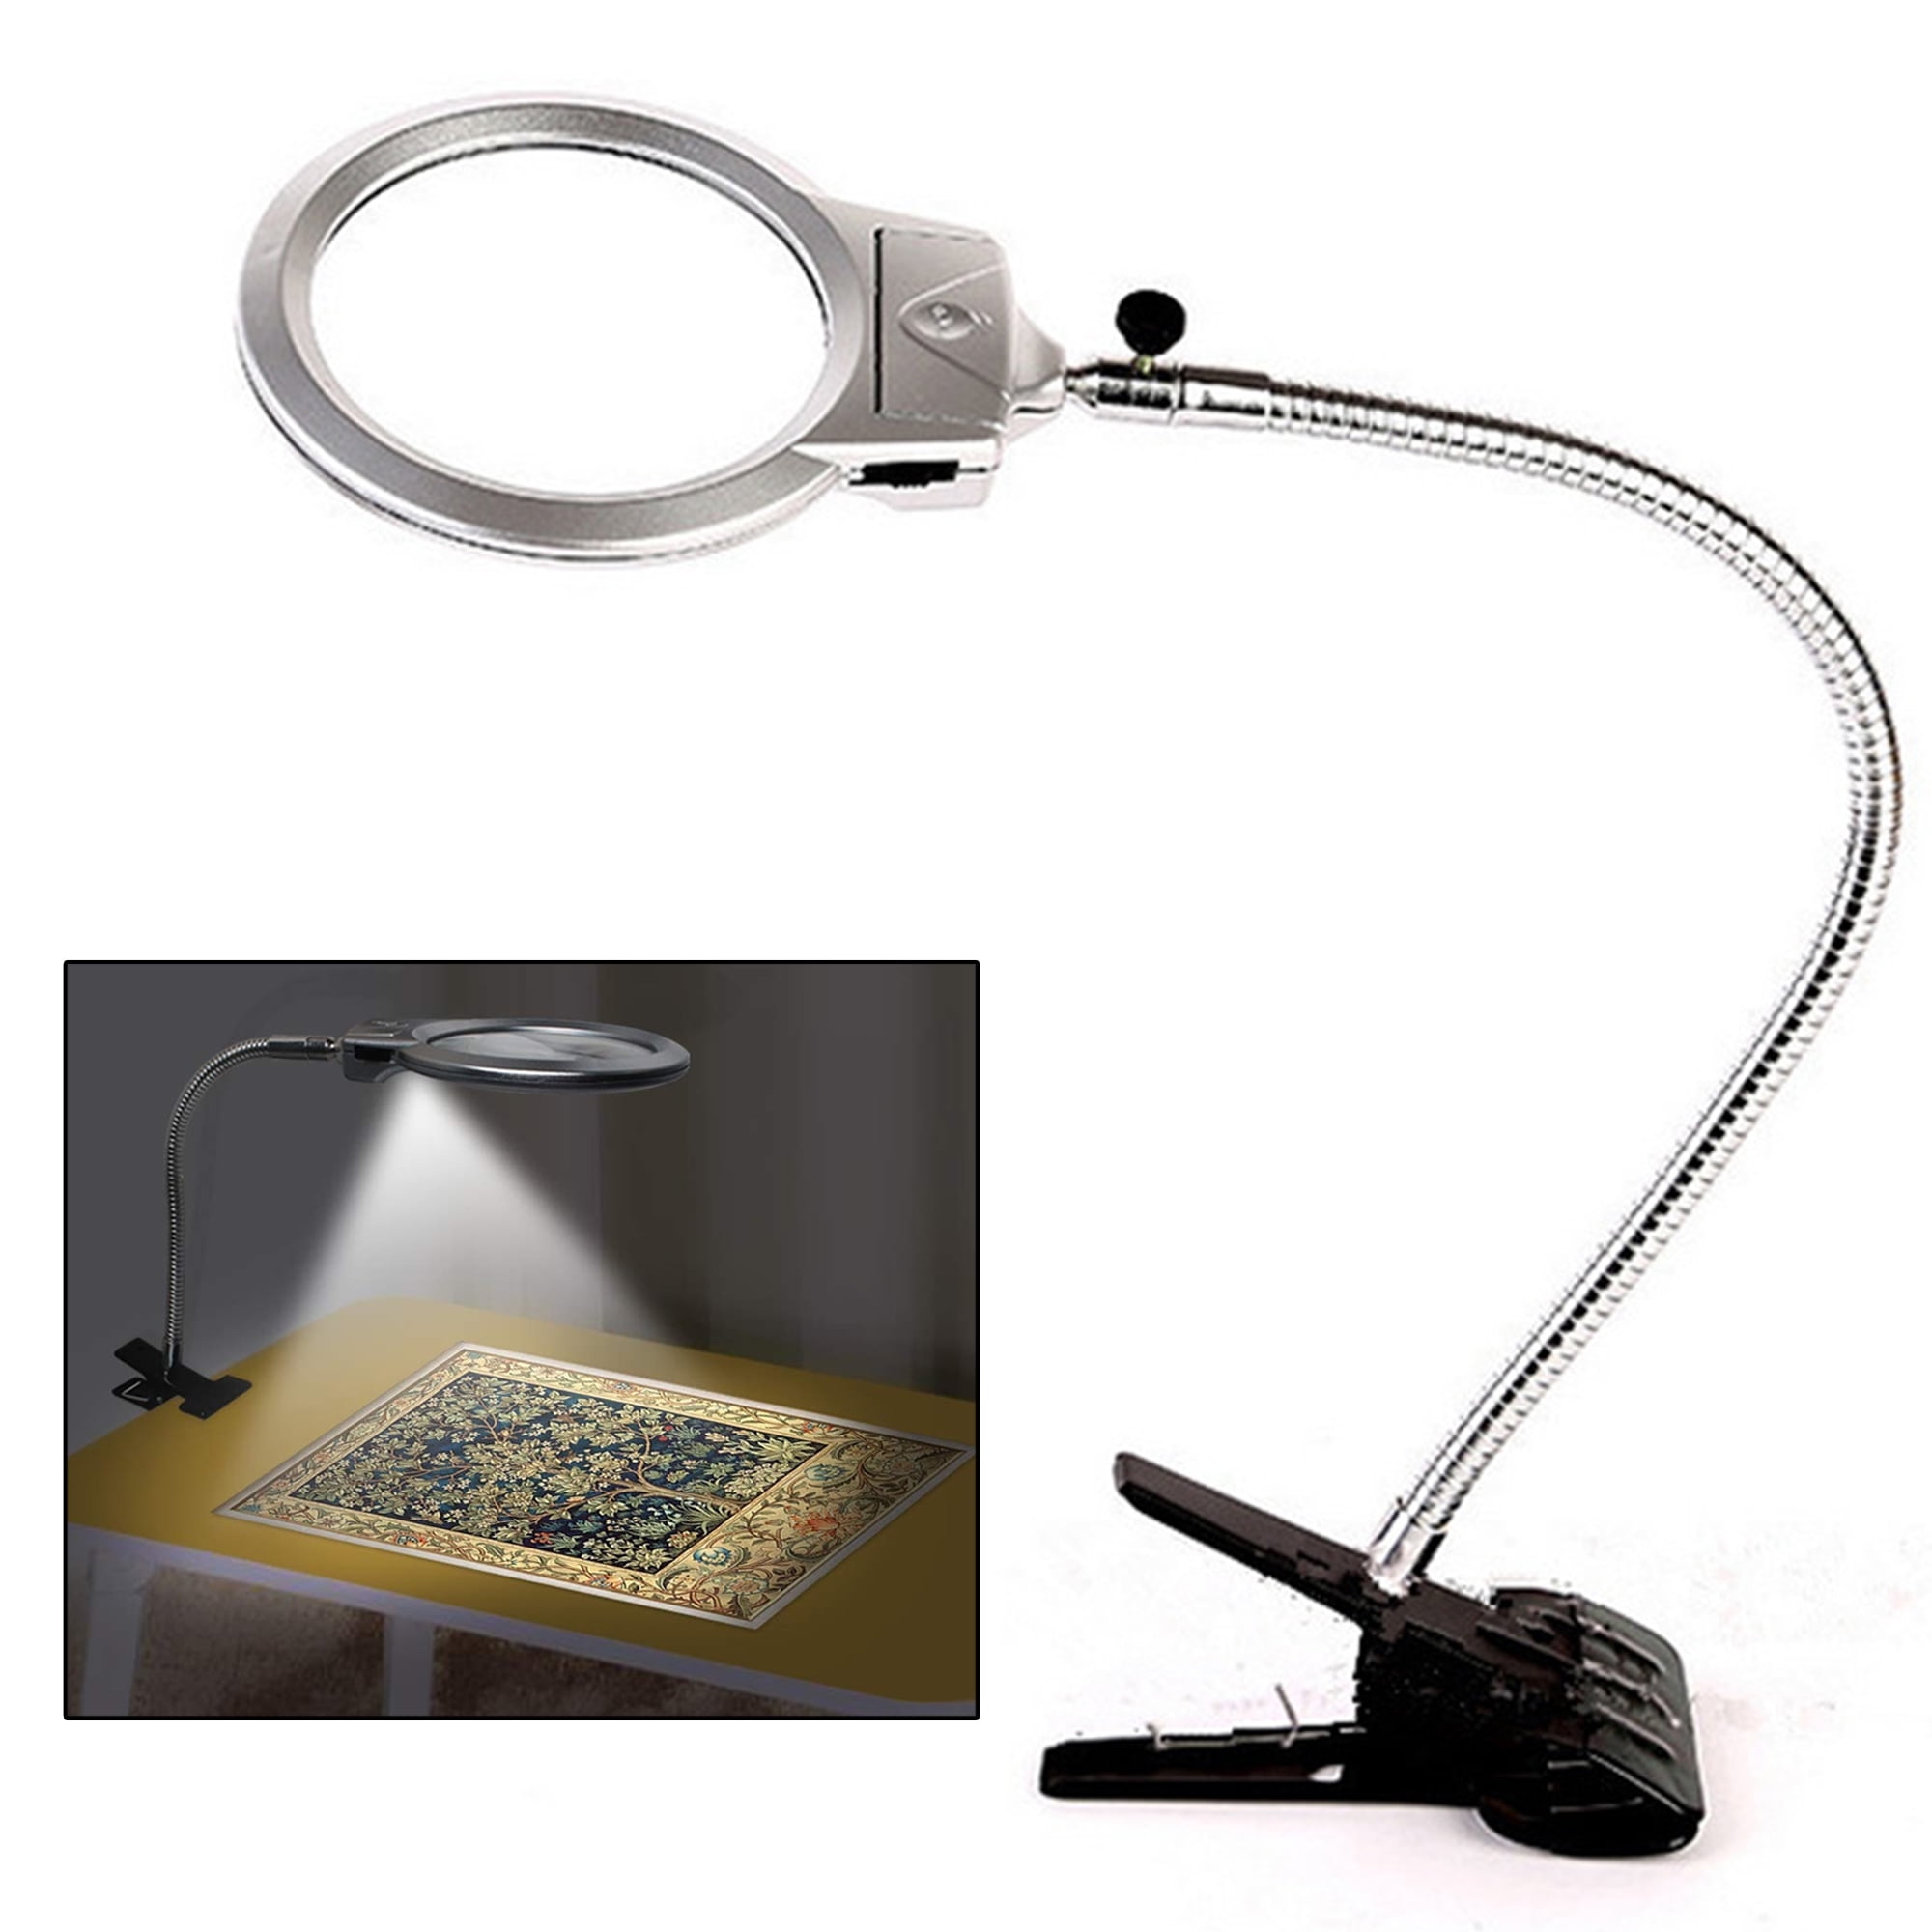 Happyline Magnifier with Light,2X-4X Magnifier LED Light with Clip